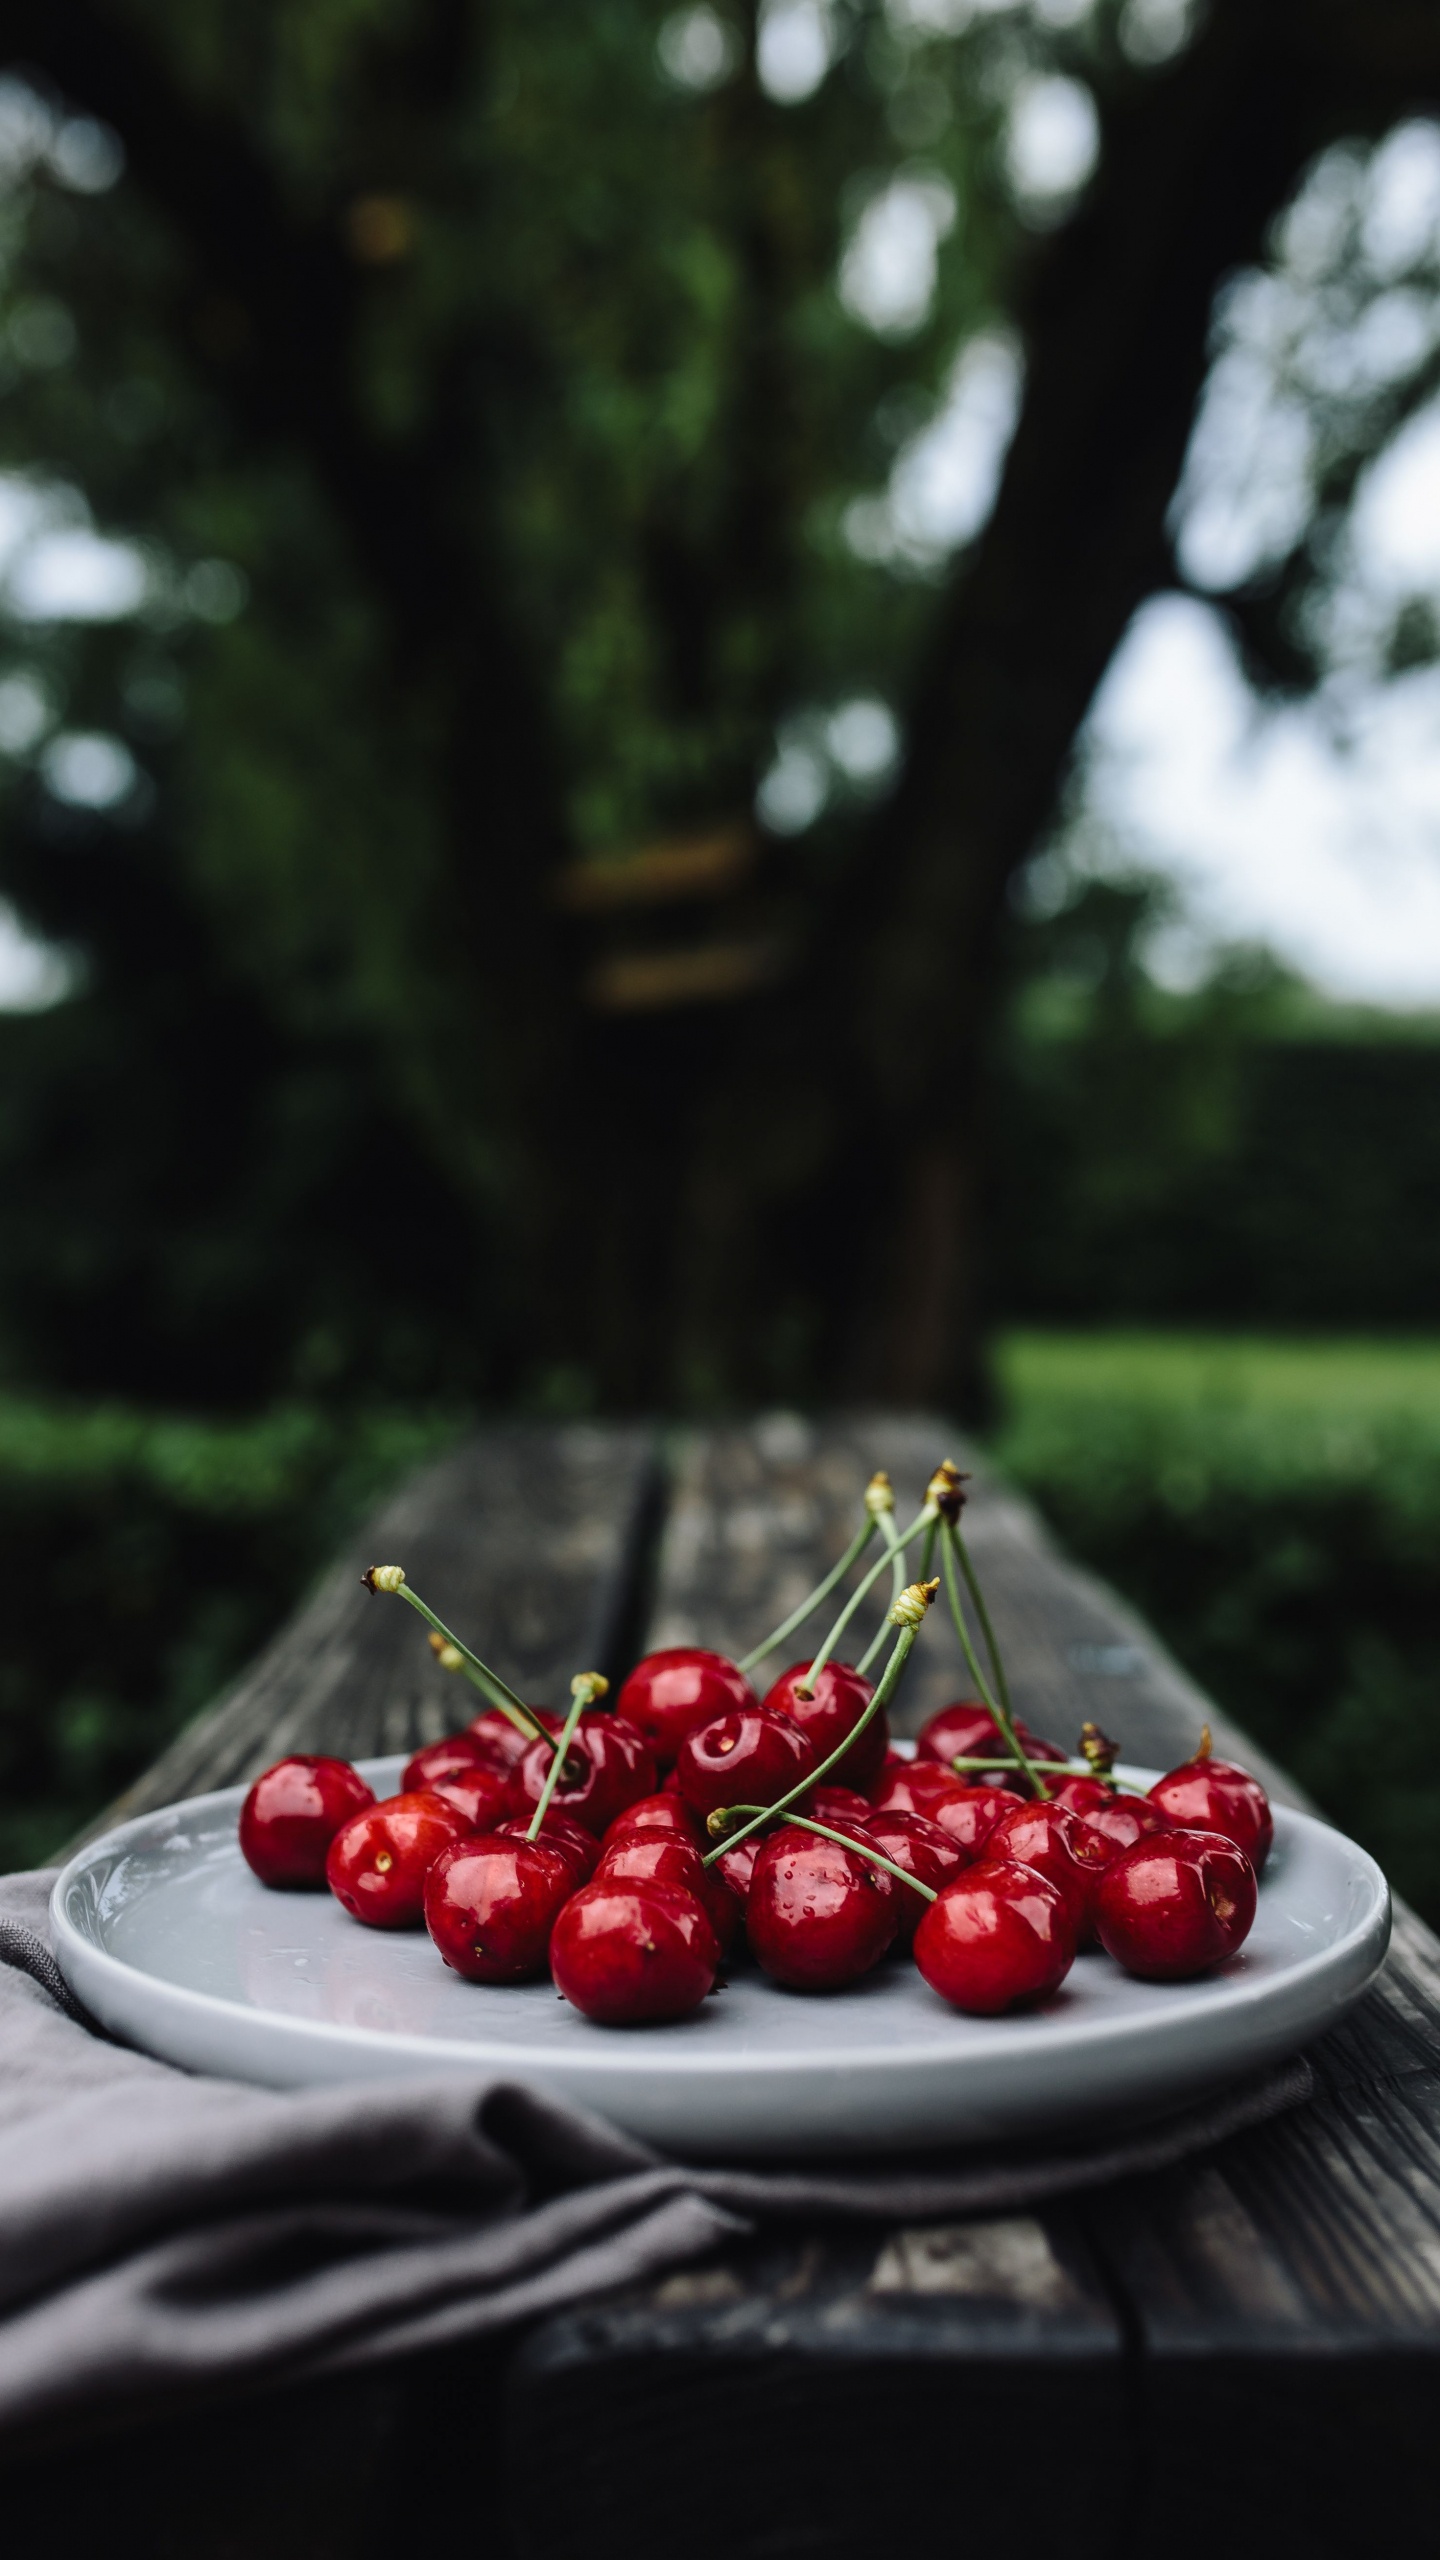 Red Cherries on White Ceramic Plate. Wallpaper in 1440x2560 Resolution